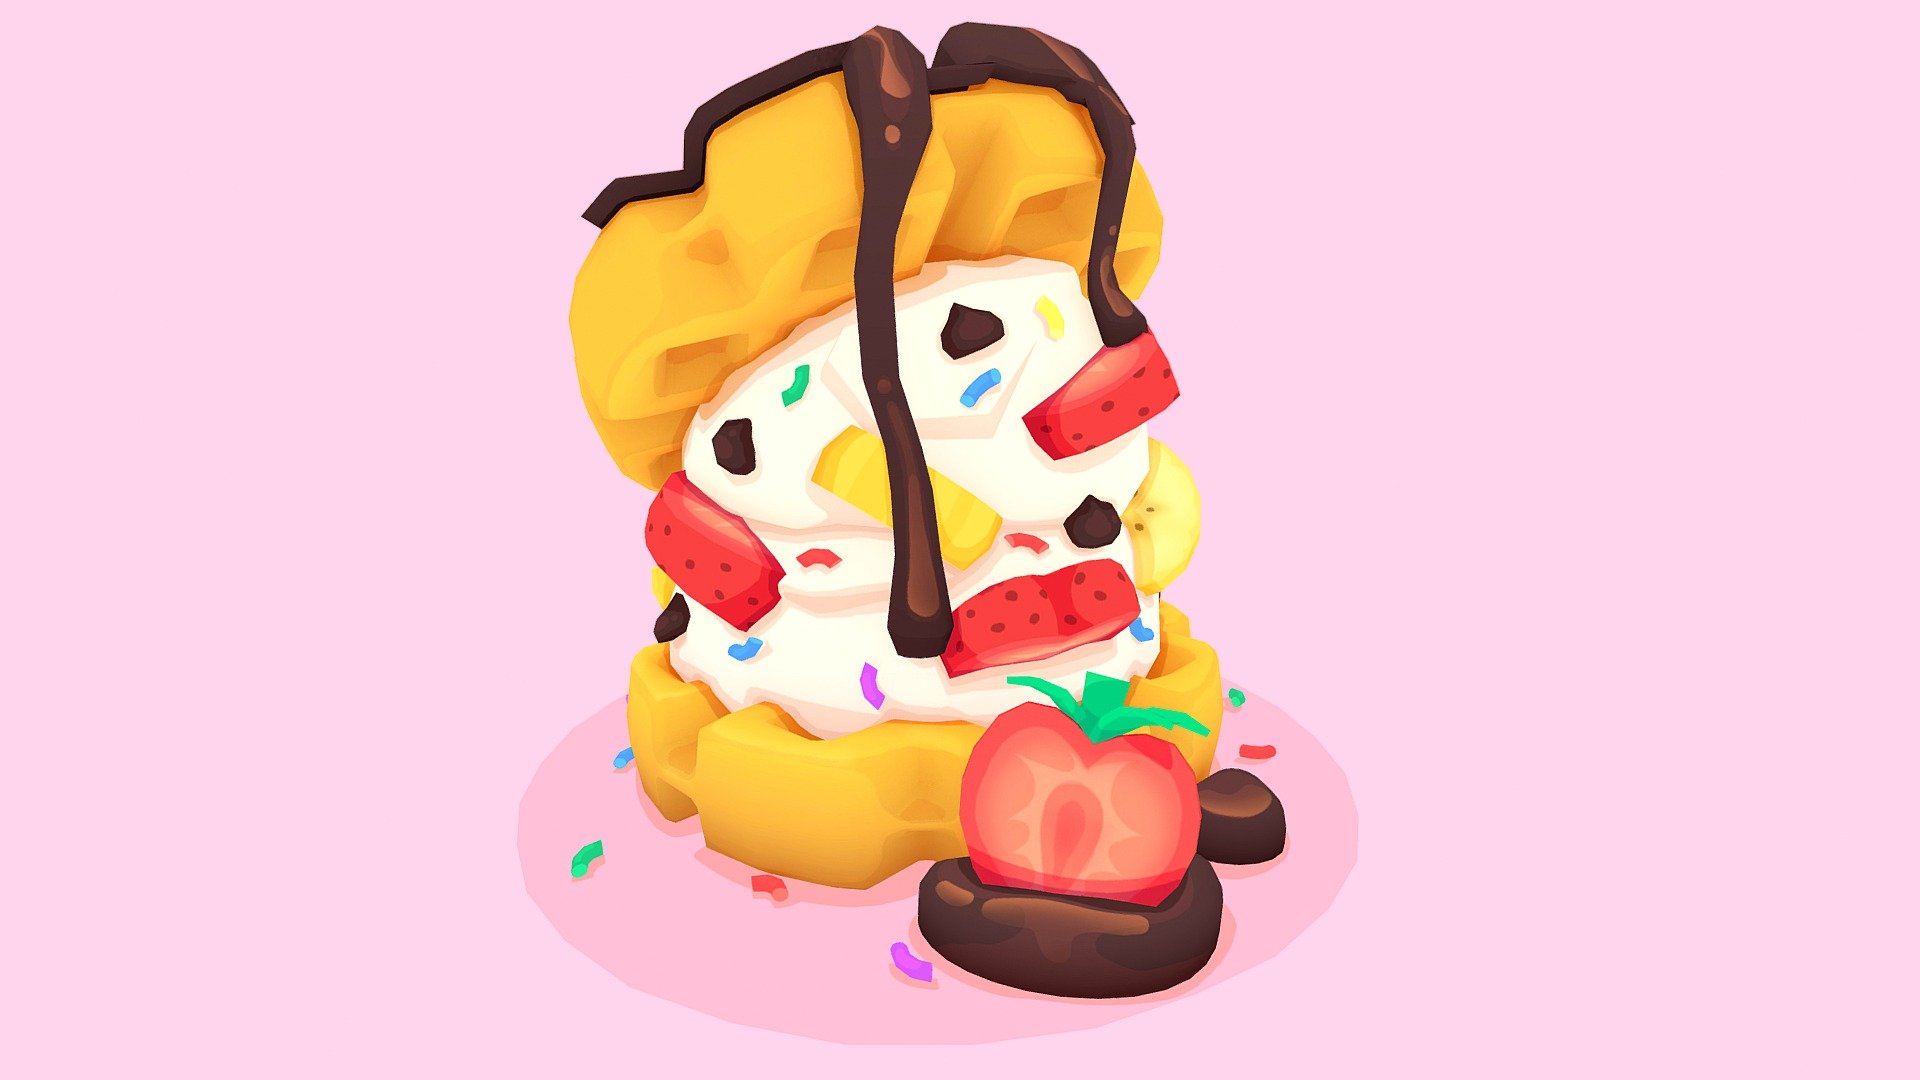 Waffle Ice Cream Sandwich modelled in 3dsmax and painted in Substance Painter 3d model